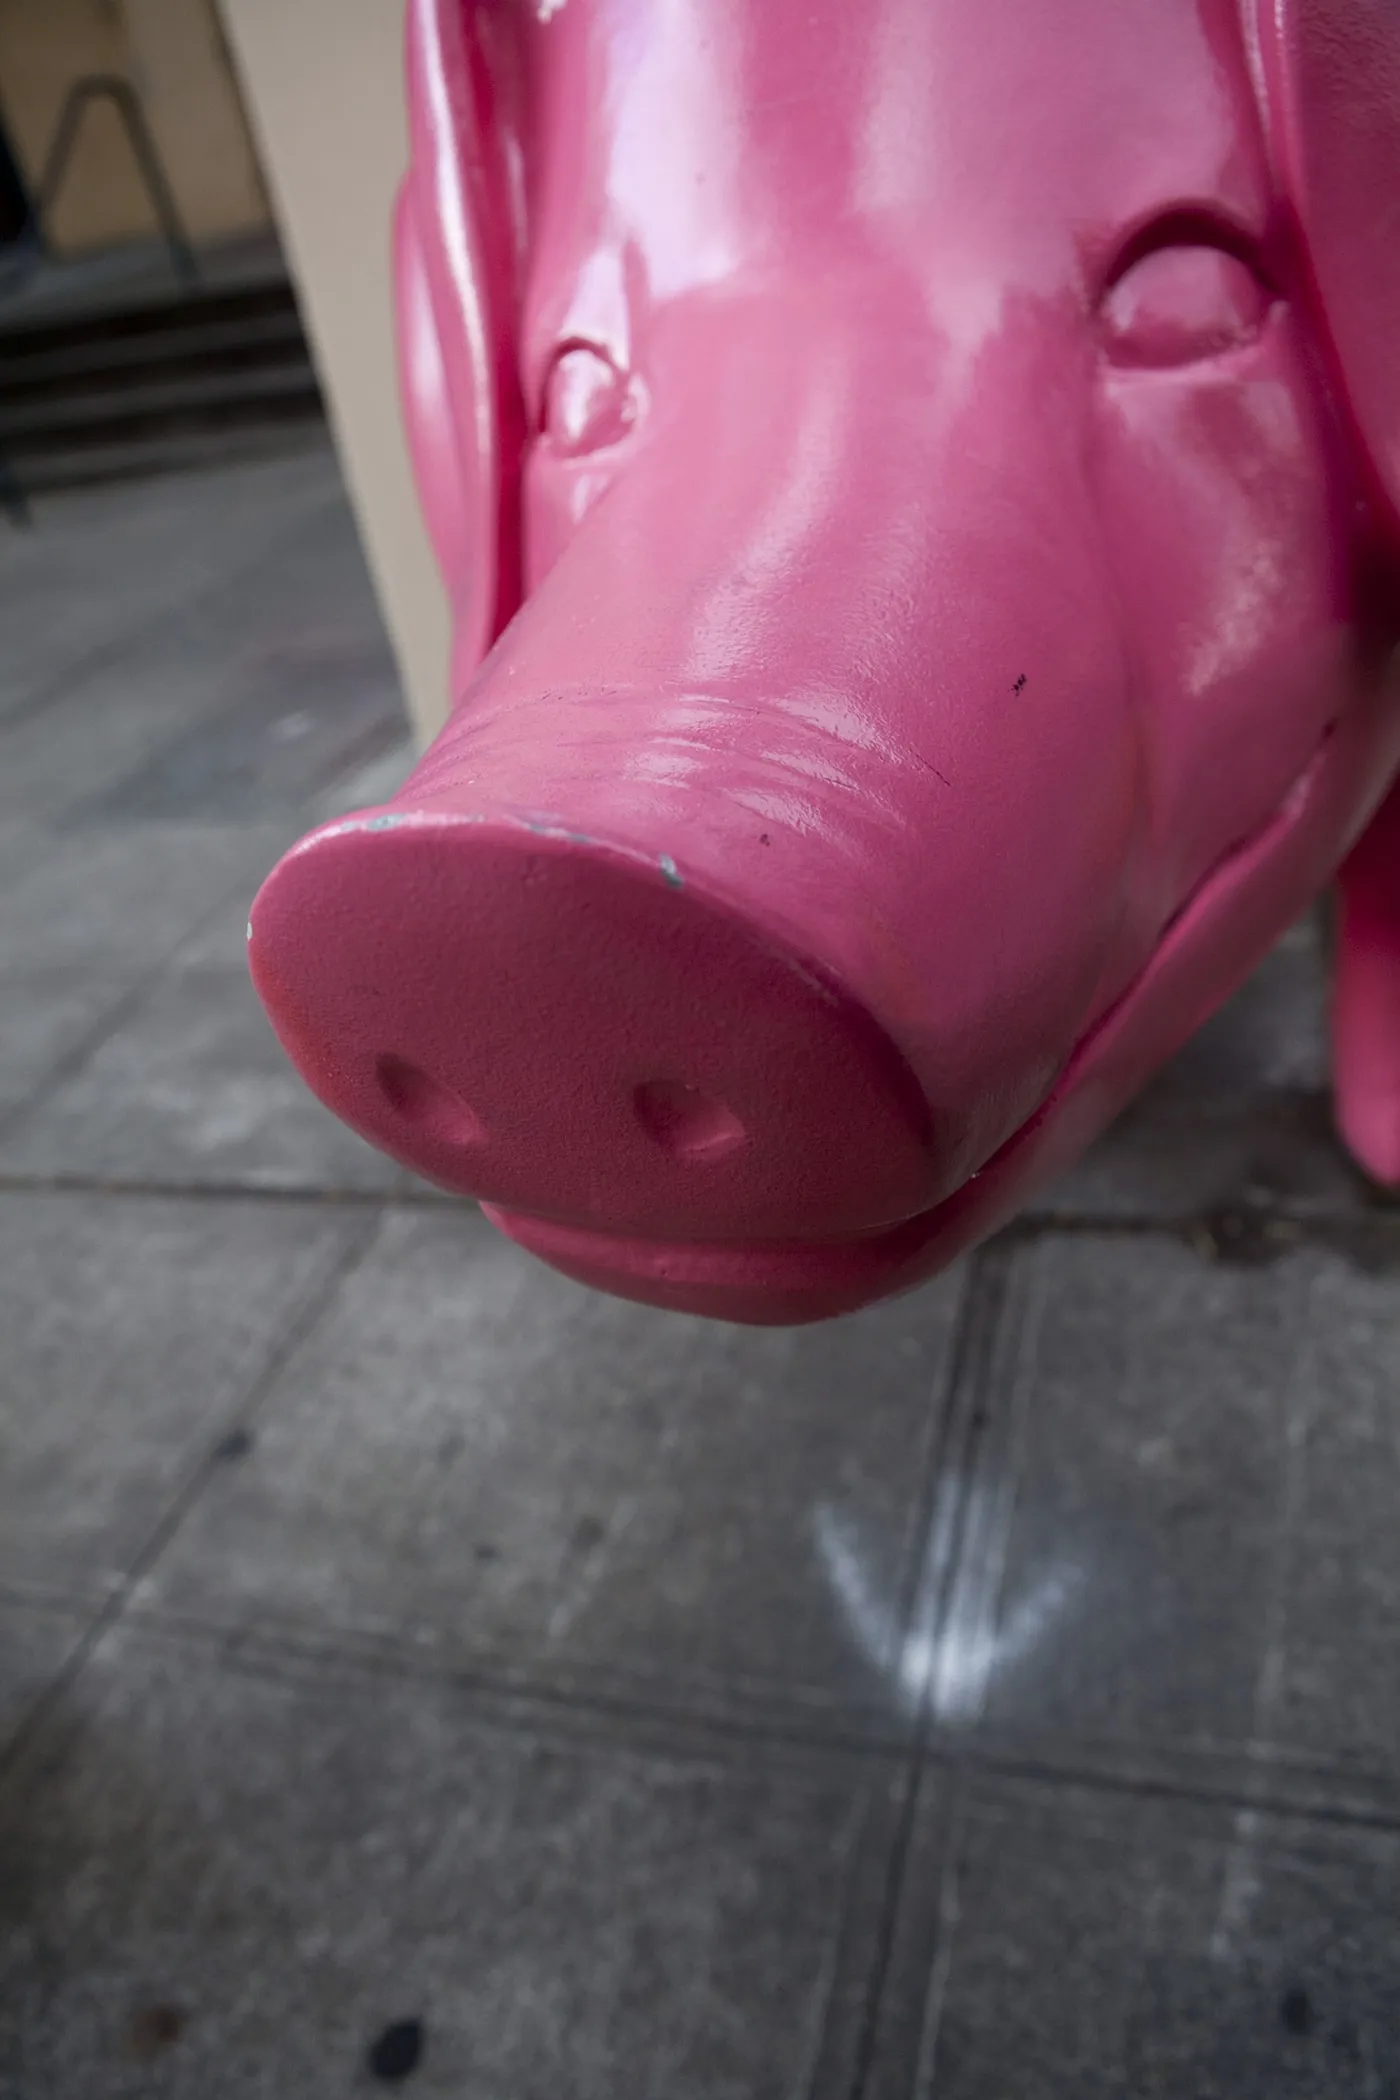 Pigs on Parade - Giant pink pig outside of Pike Place Market in Seattle, Washington.